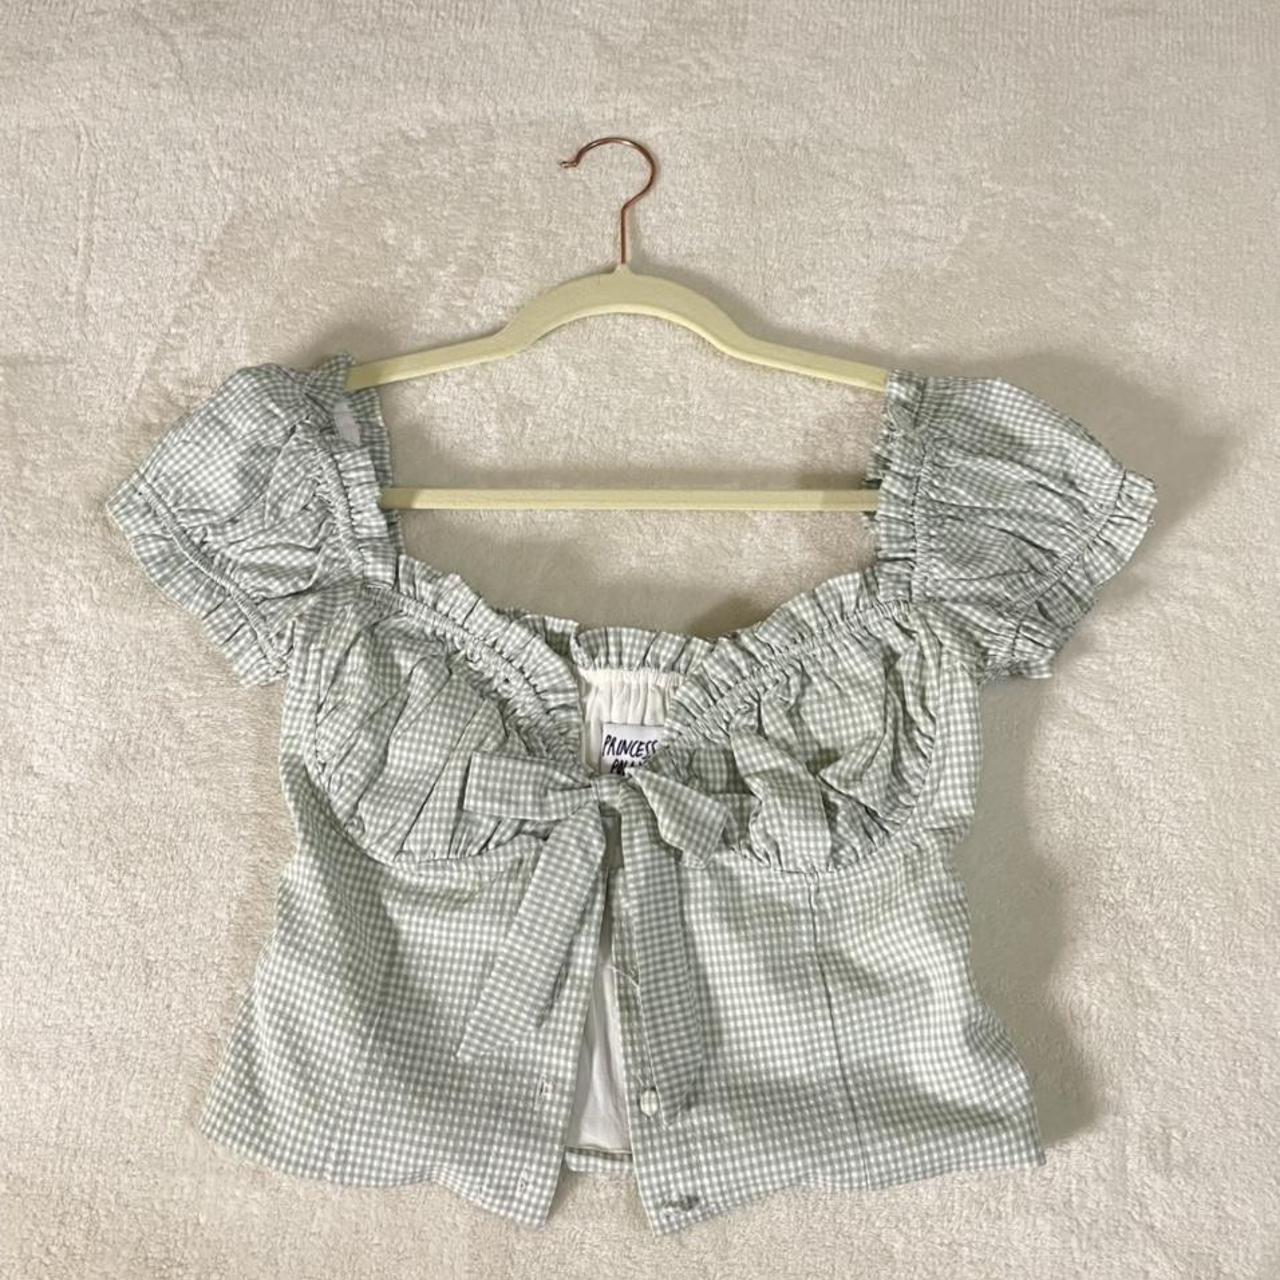 Princess Polly Women's Green and White Blouse | Depop